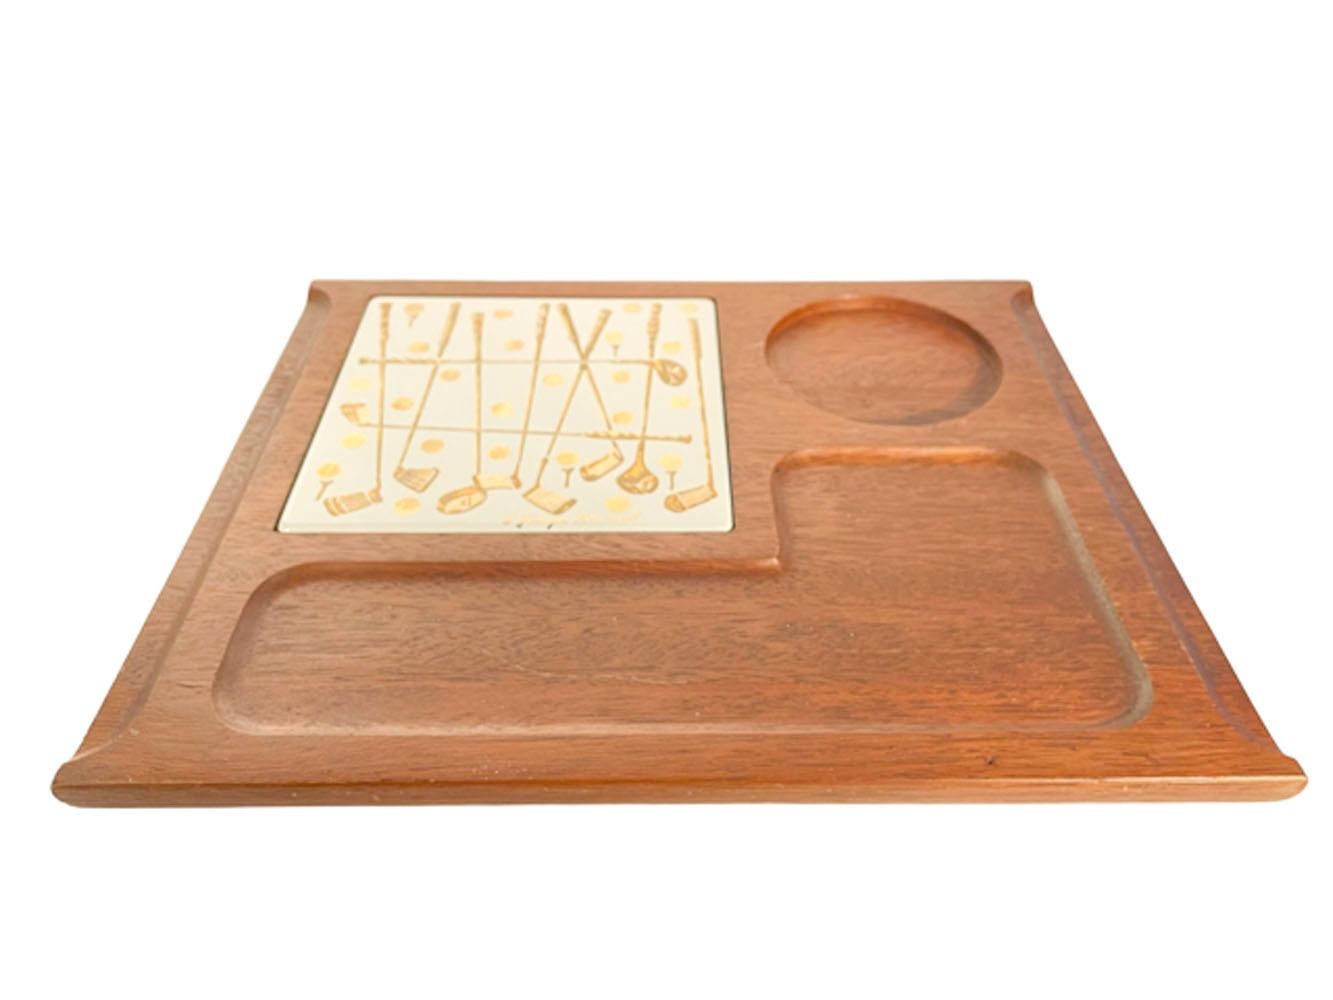 Georges Briard designed cutting board in walnut with a white inset tile cutting surface decorated in gold in his 